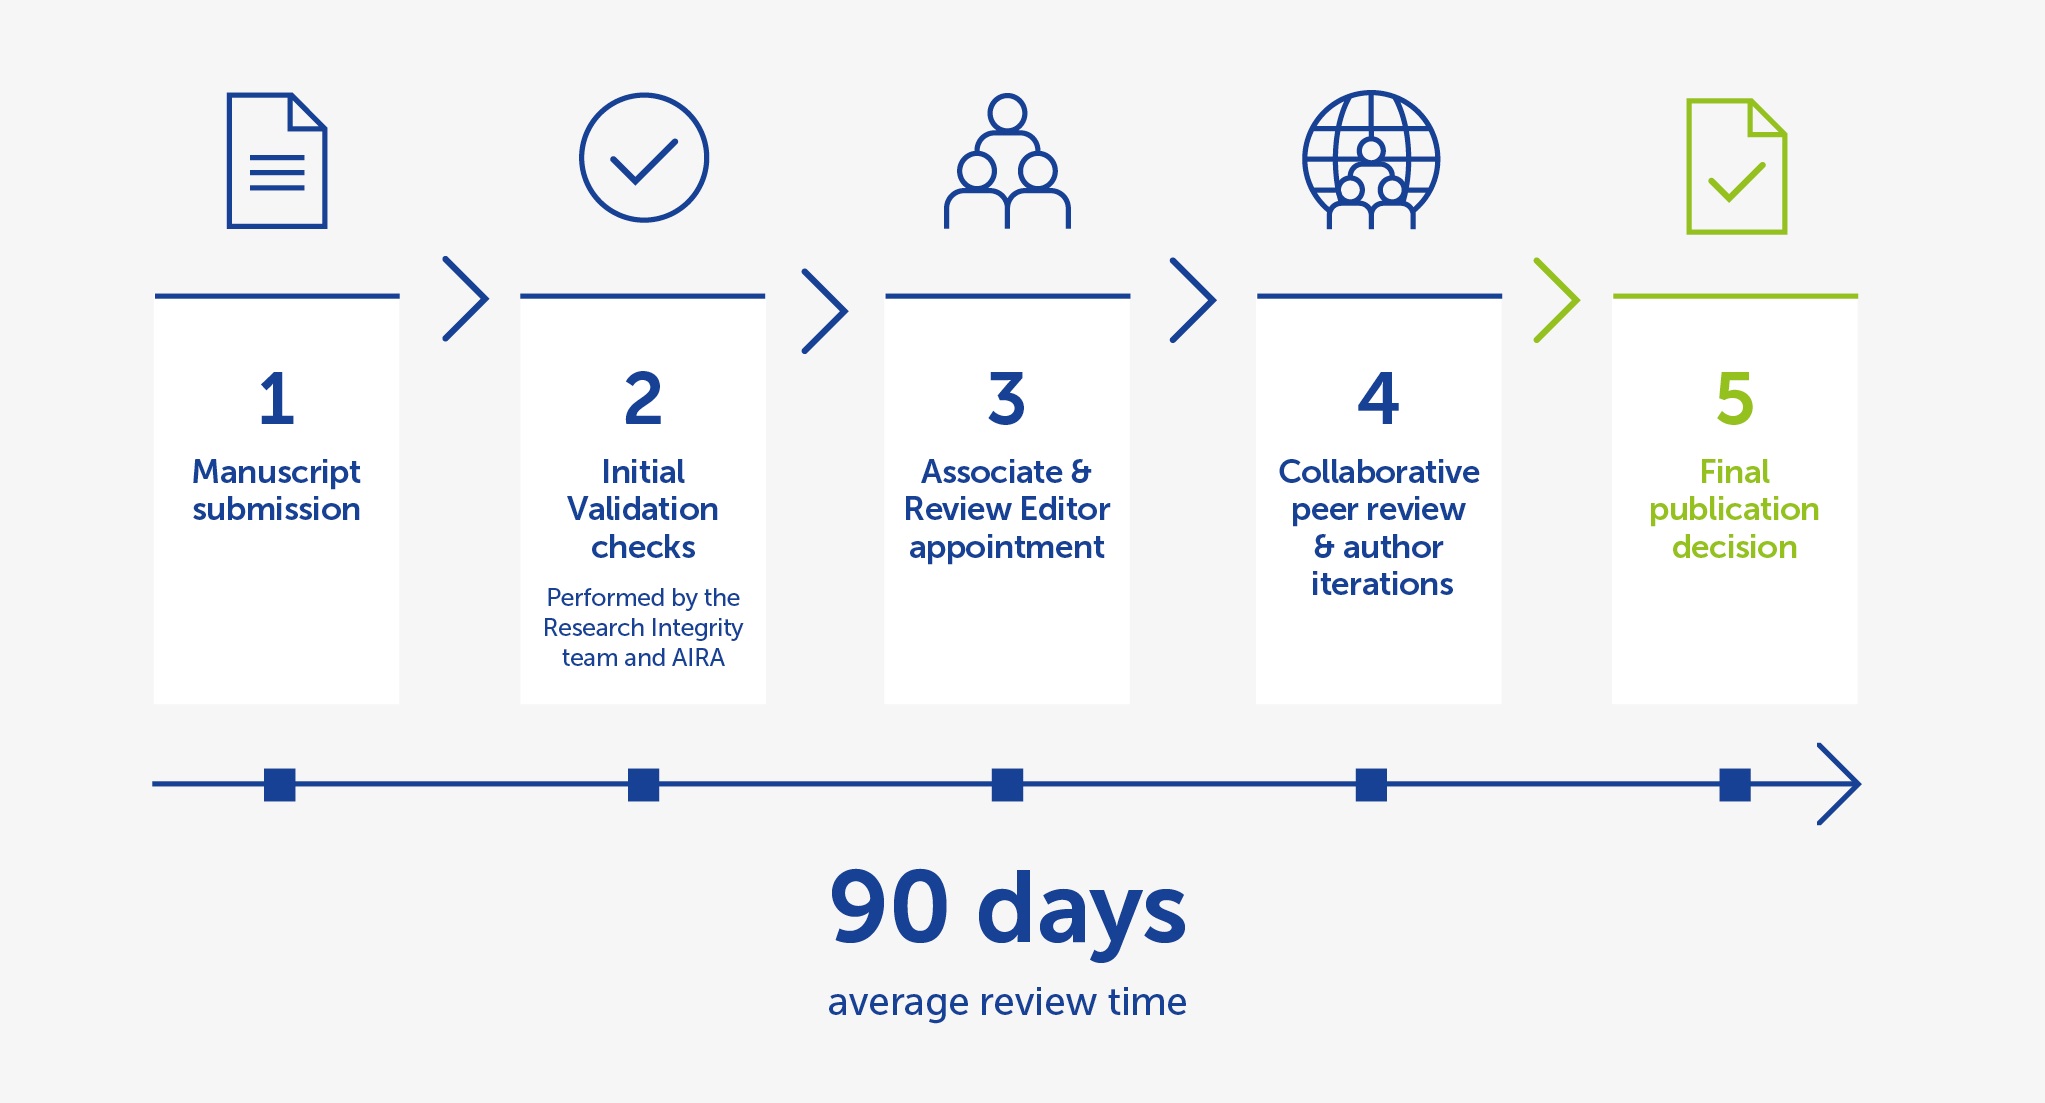 Peer review process average time